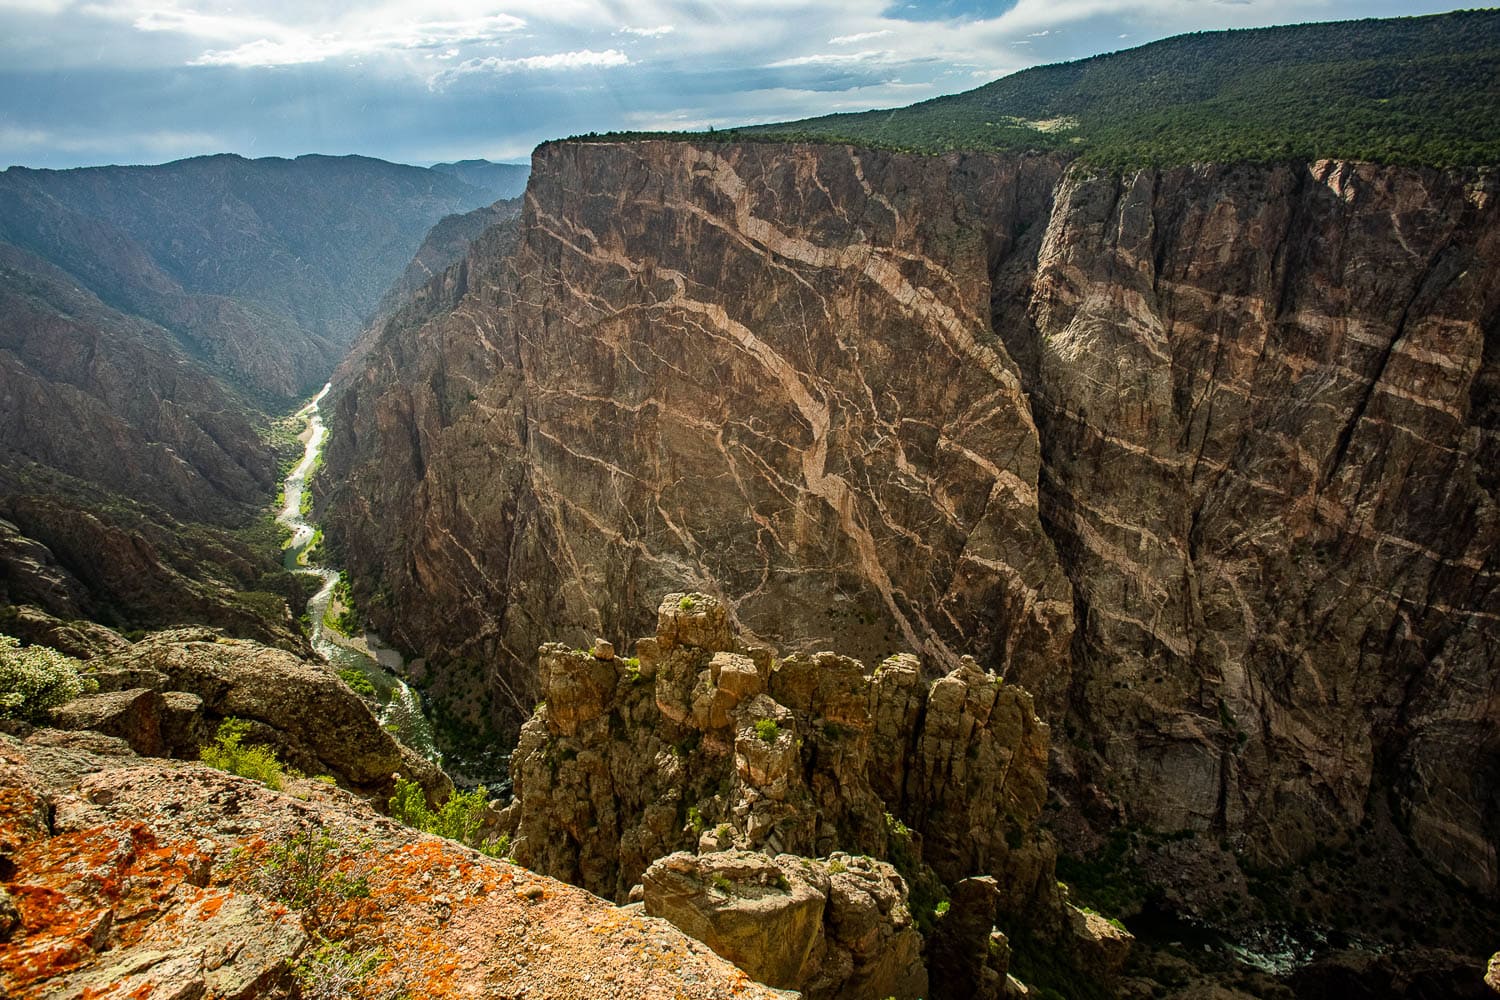 The painted wall at Black Canyon of the Gunnison National Park in colorado